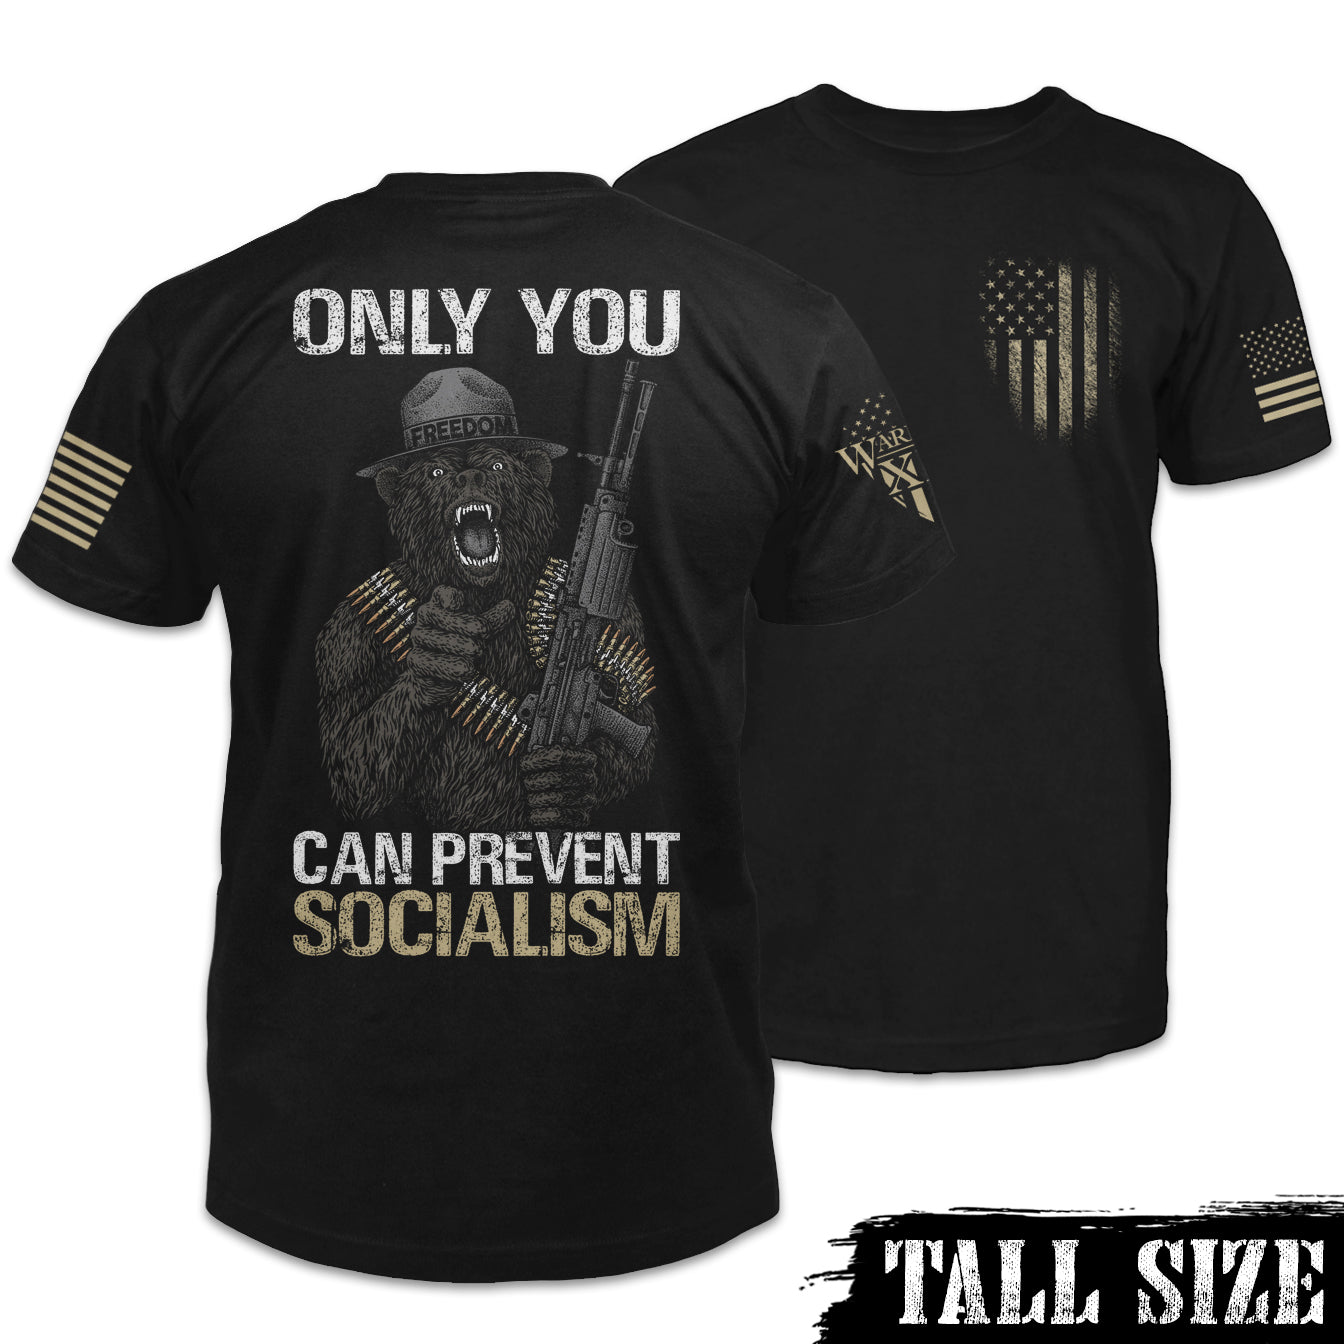 Only You Can Prevent Socialism - Tall Size